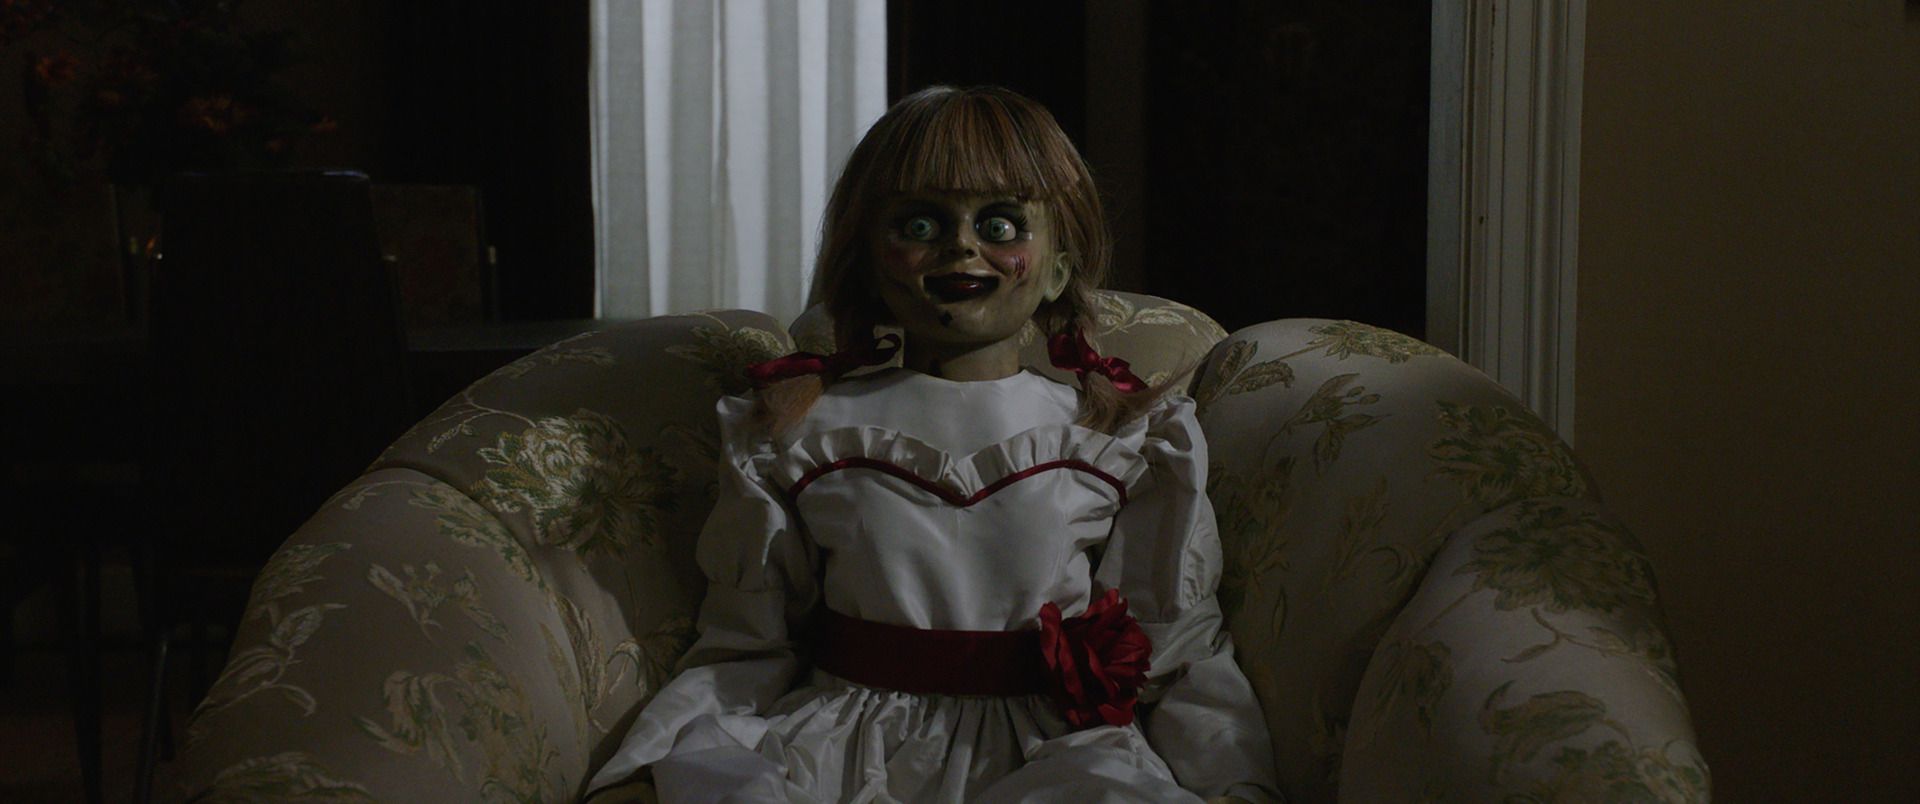 Movie review: Annabelle Comes Home - NZ Herald